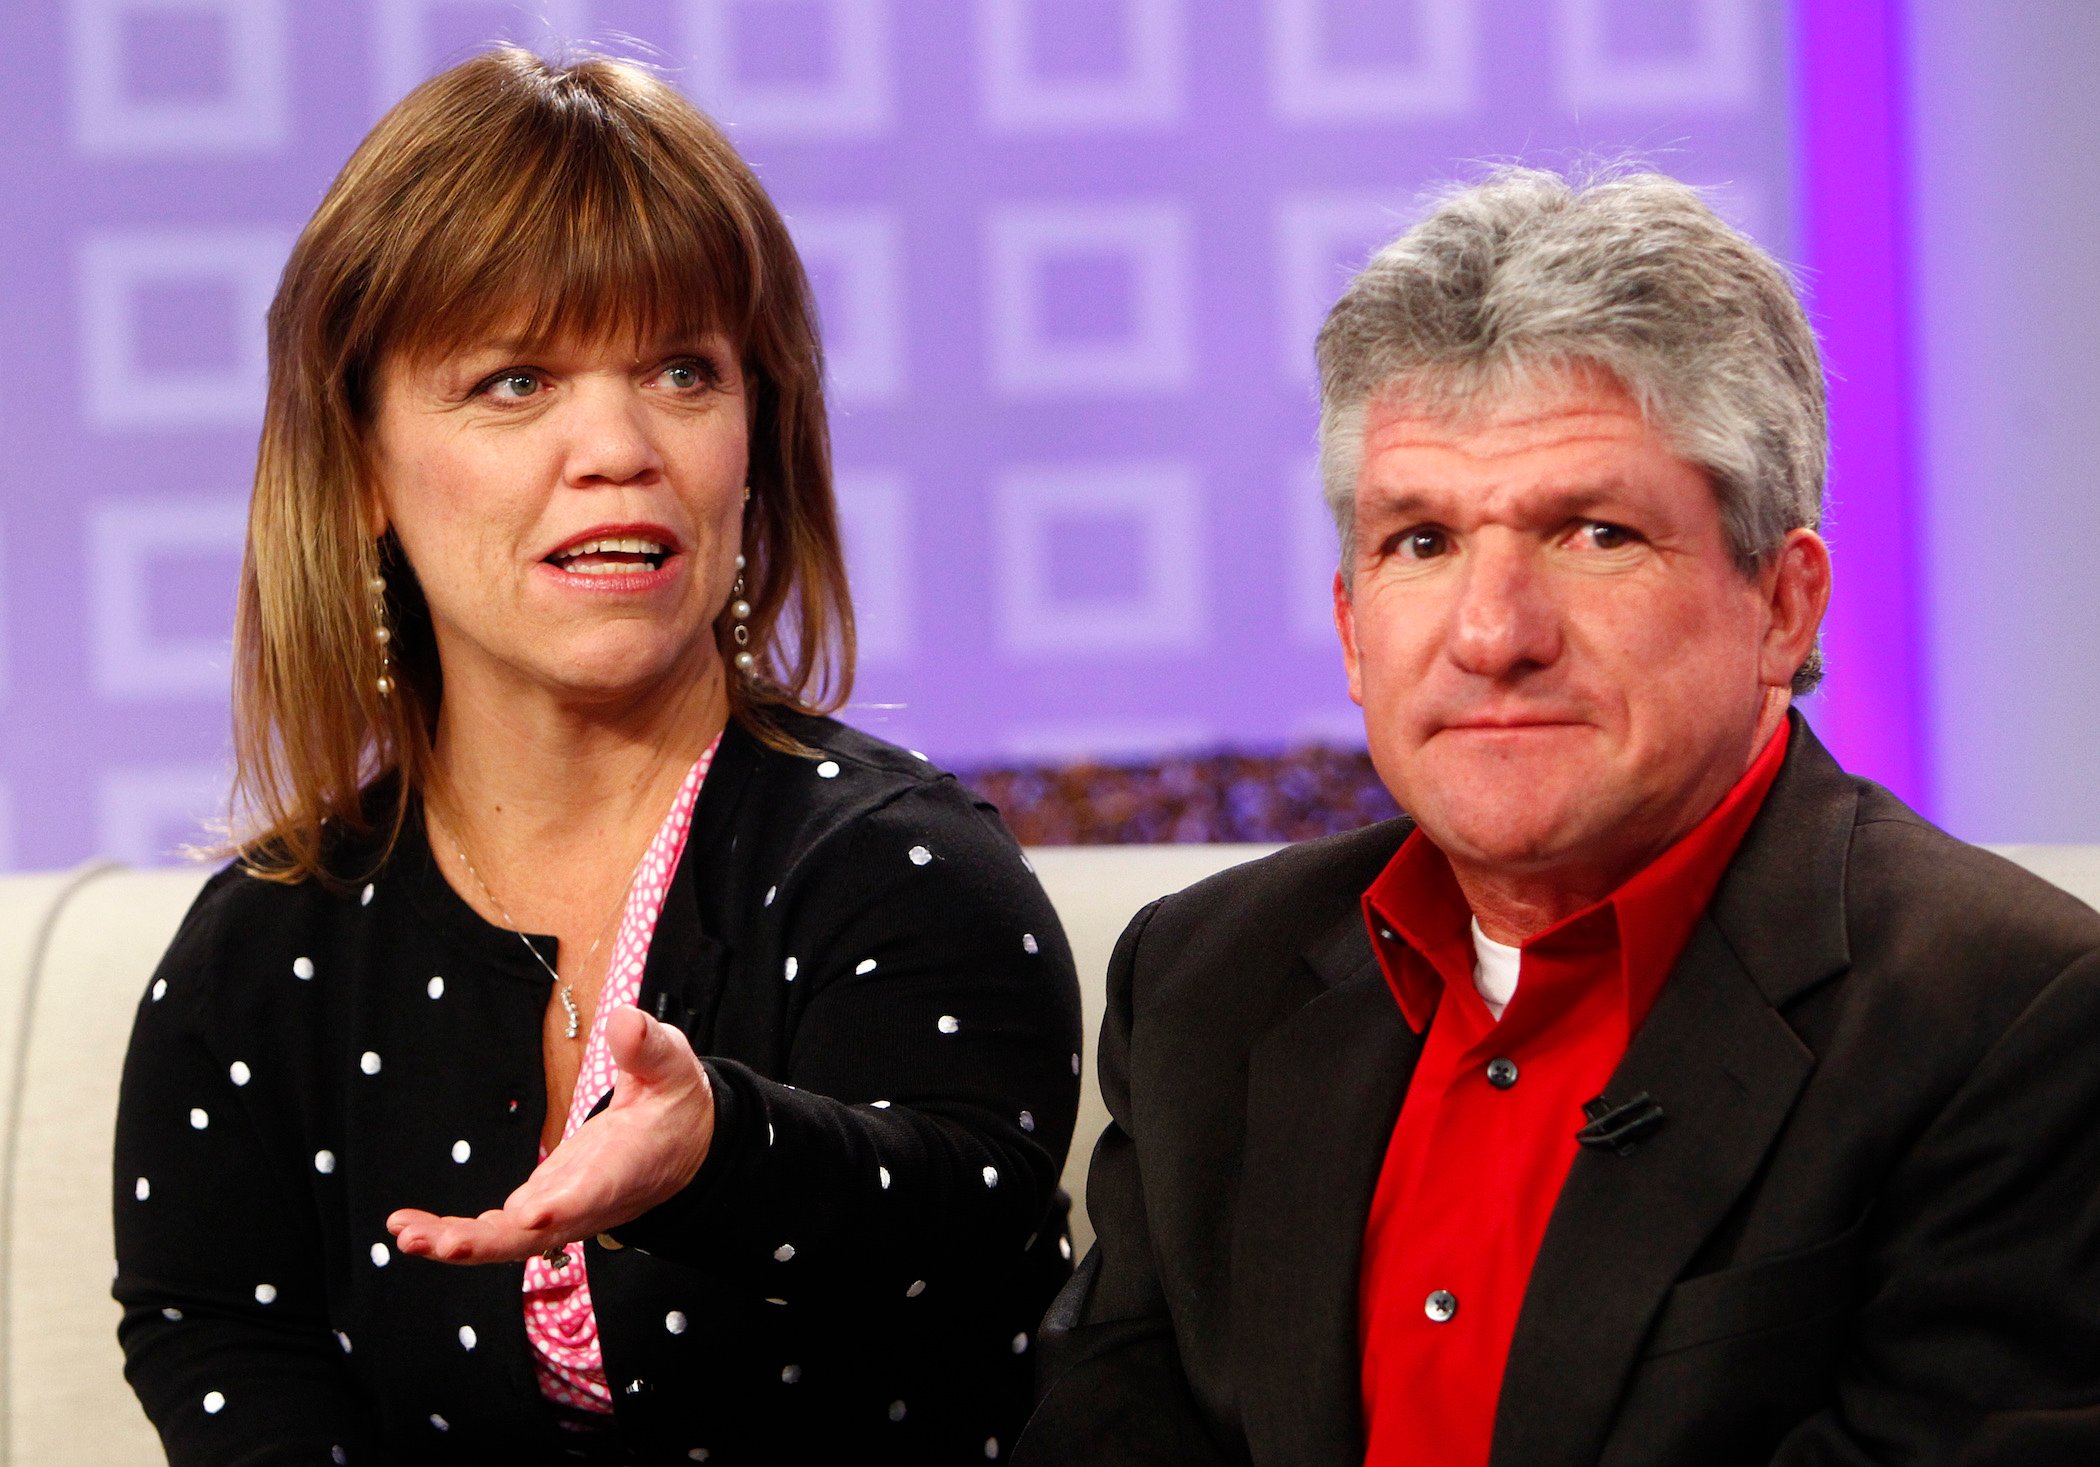 Amy Roloff and Matt Roloff from 'Little People, Big World' sitting together on a couch against a purple background